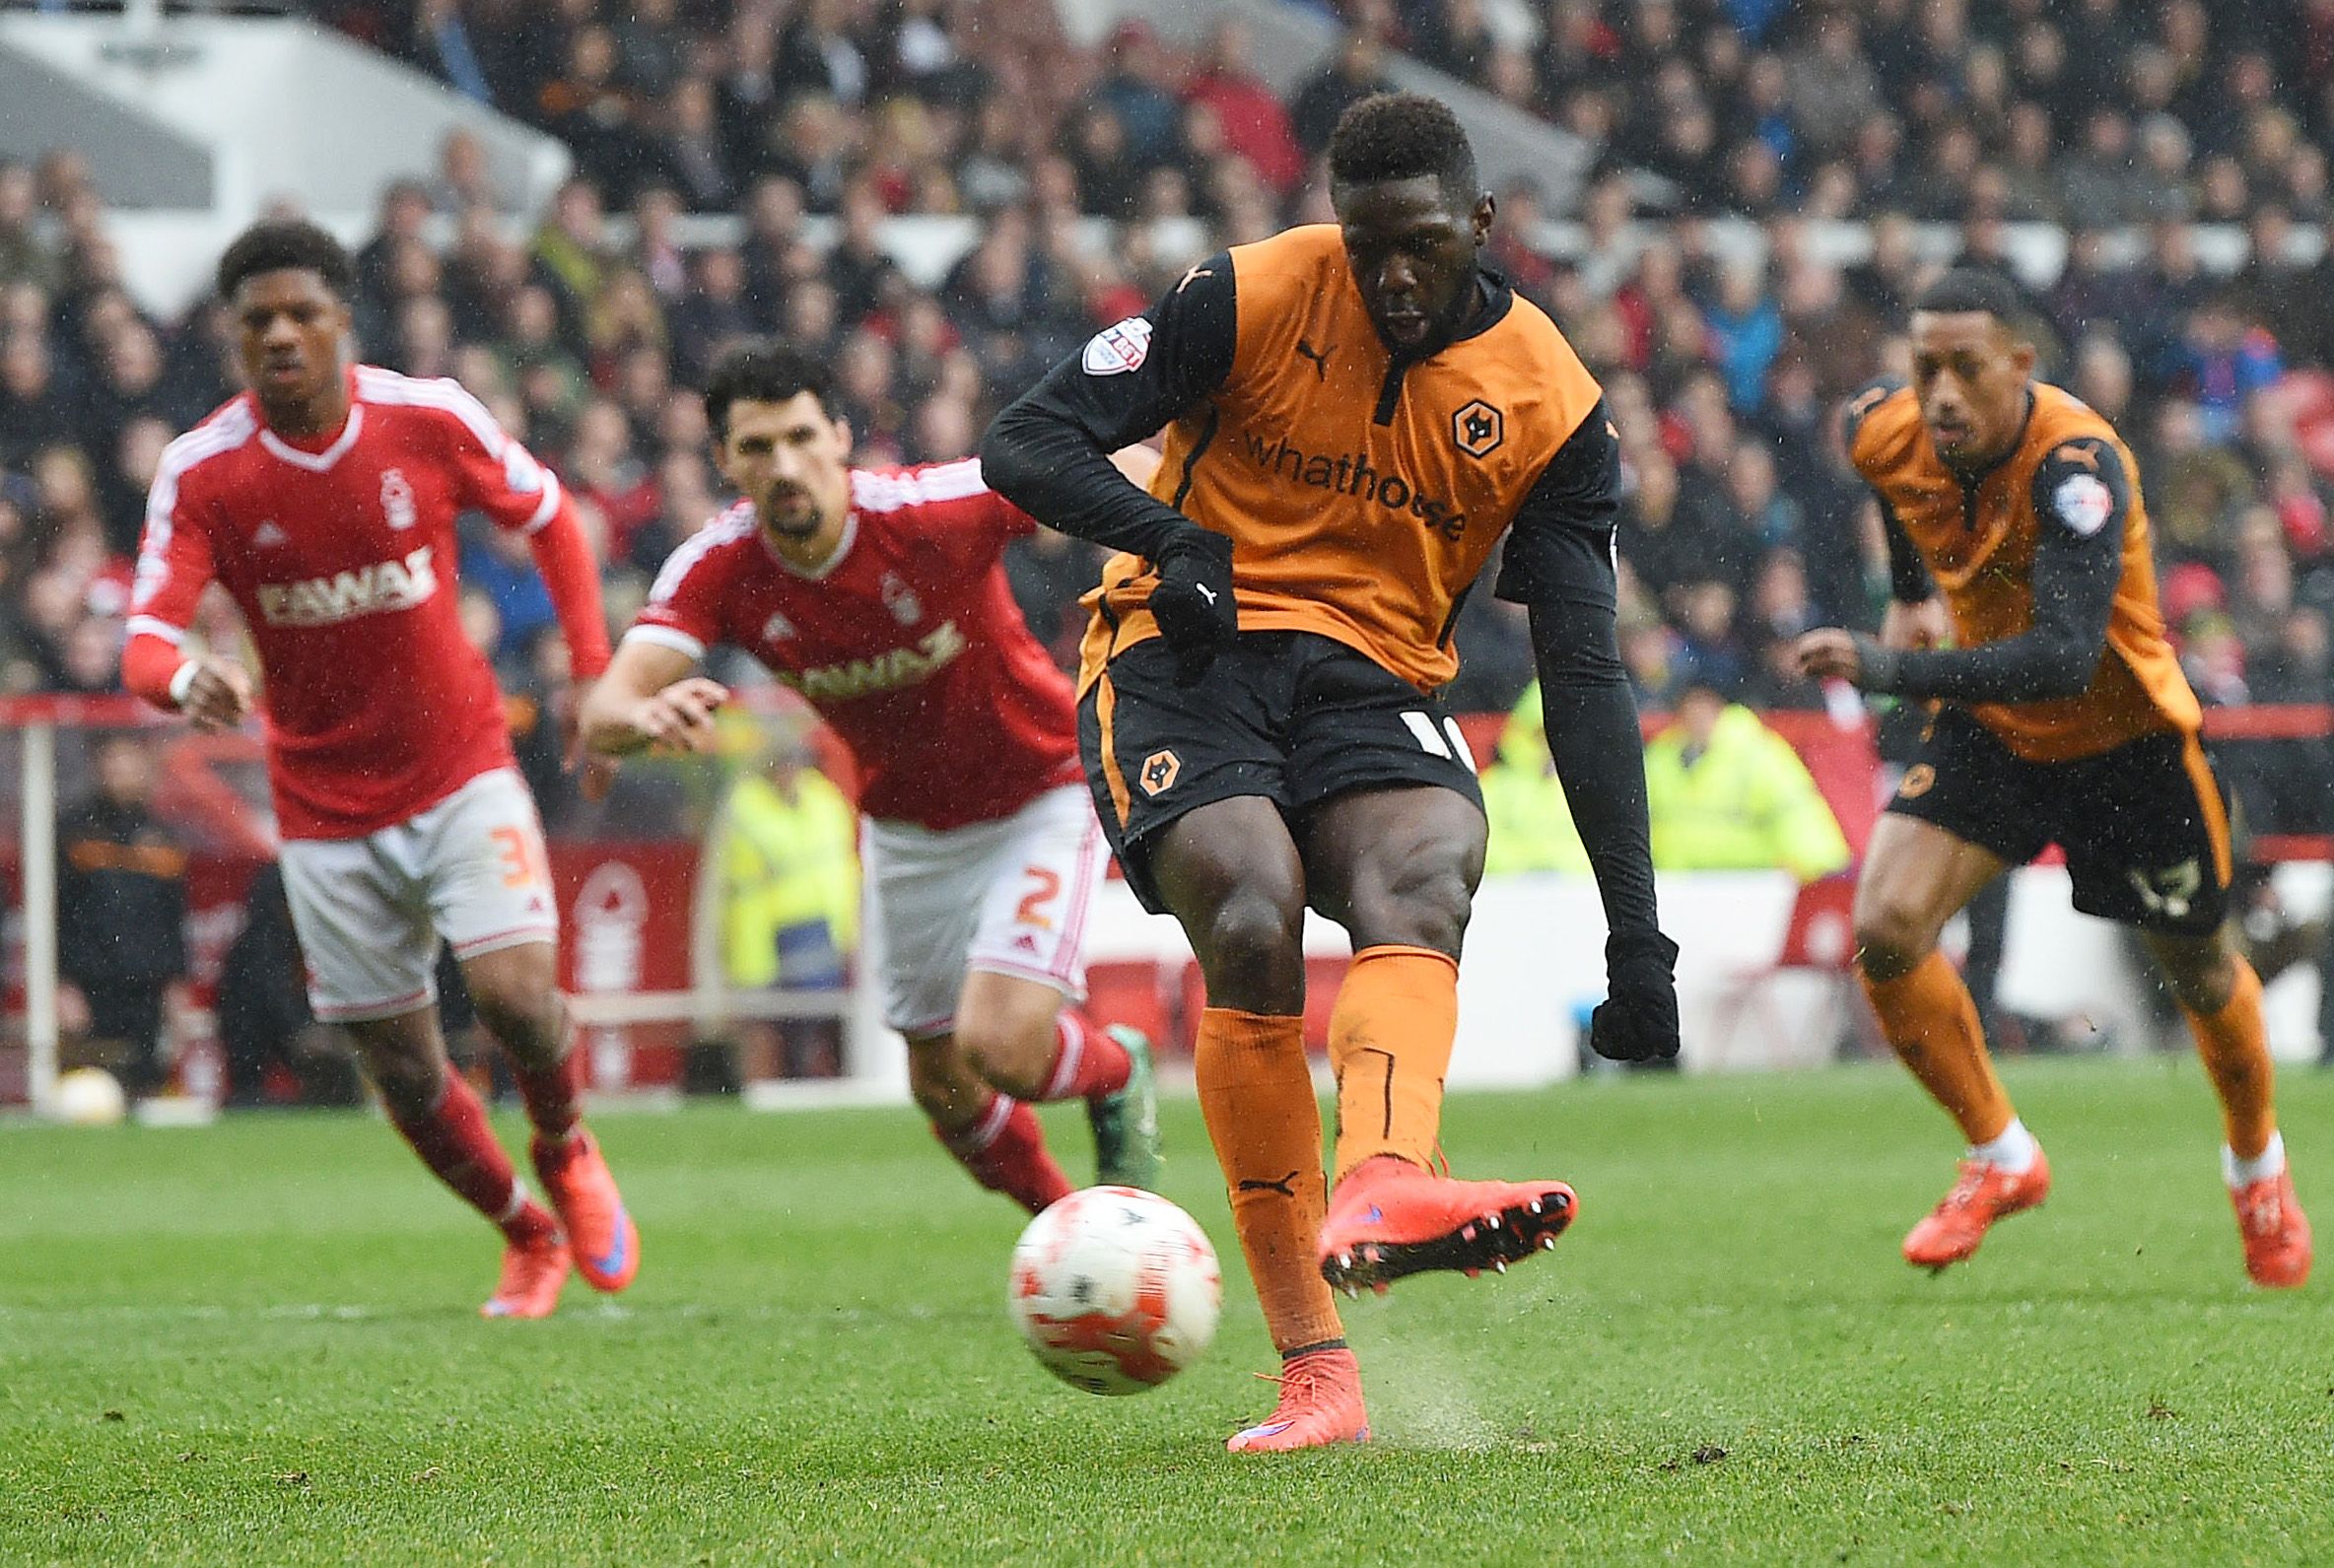 Football - Nottingham Forest v Wolverhampton Wanderers - Sky Bet Football League Championship - The City Ground - 3/4/15 
Wolves' Bakary Sako scores their second goal from the penalty spot 
Mandatory Credit: Action Images / Alan Walter 
Livepic 
EDITORIAL USE ONLY. No use with unauthorized audio, video, data, fixture lists, club/league logos or 